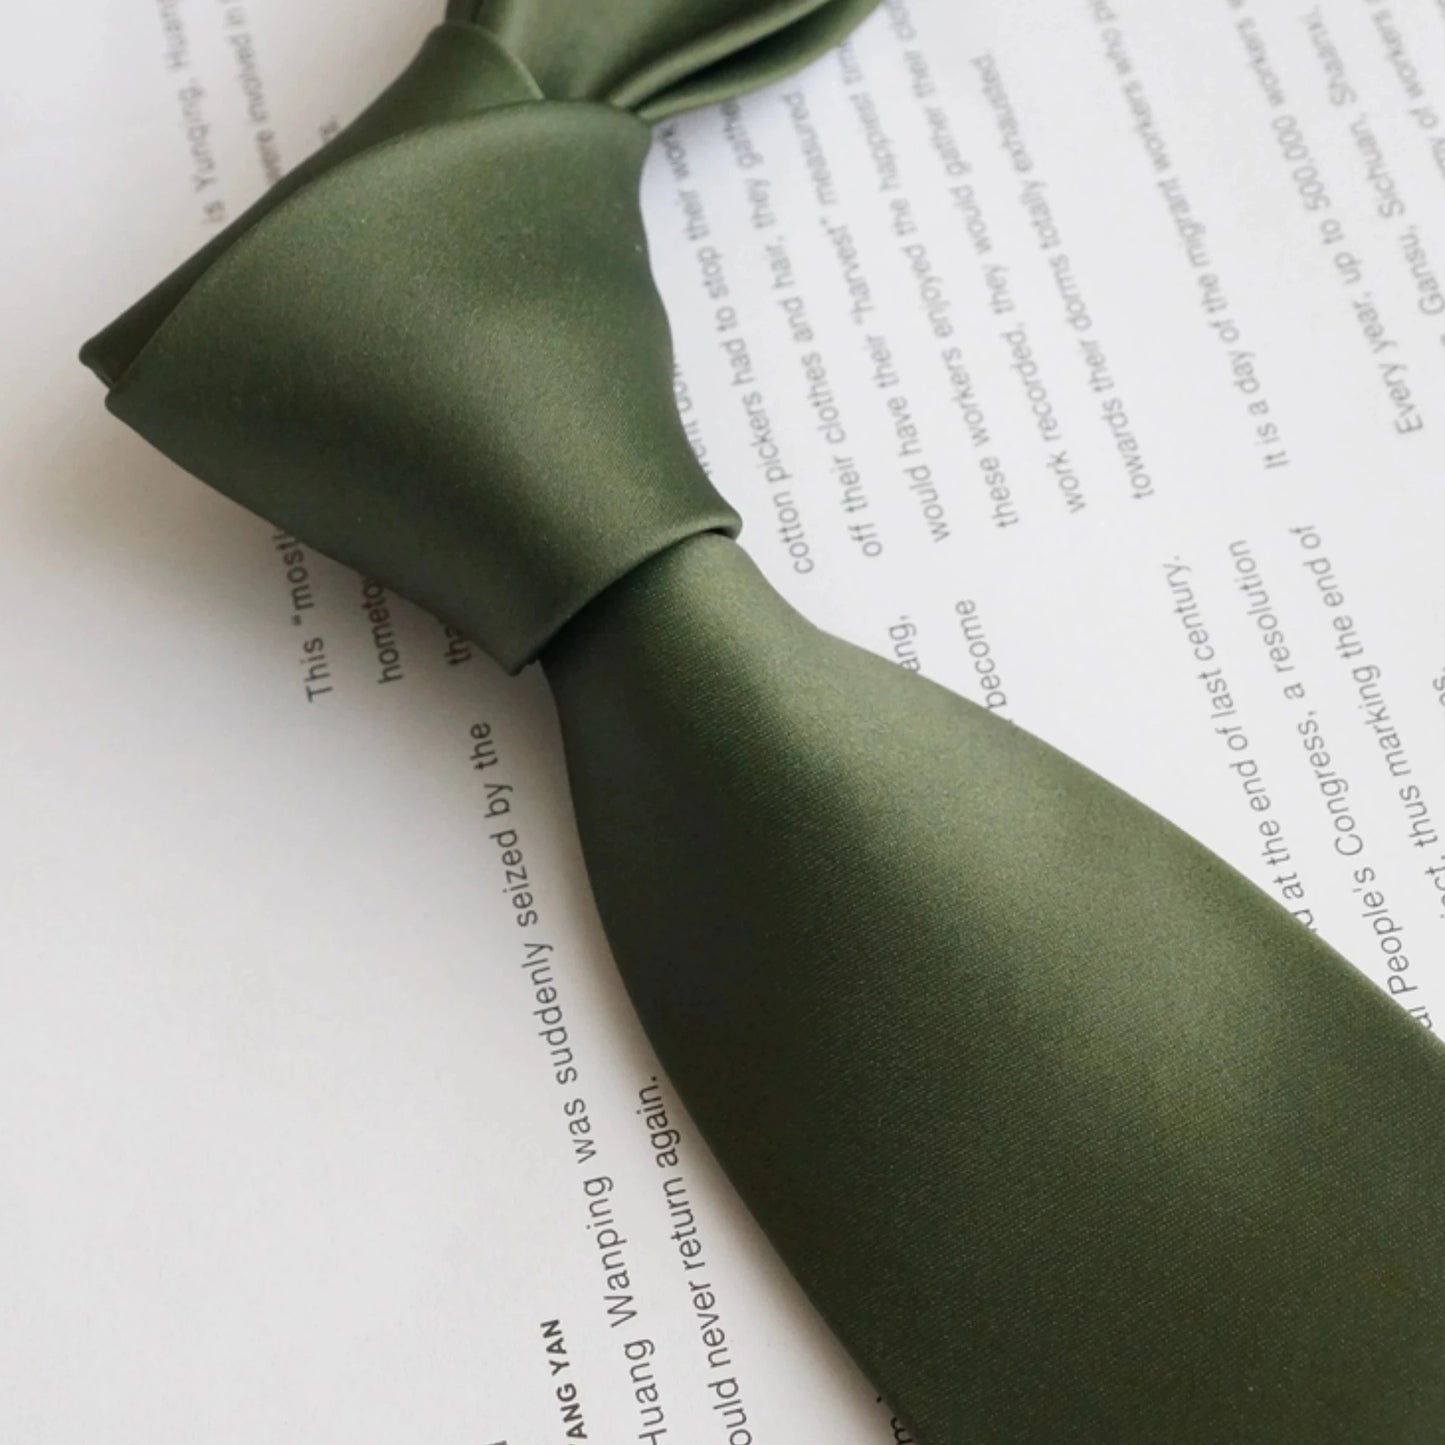 "The Lady in Green" tie